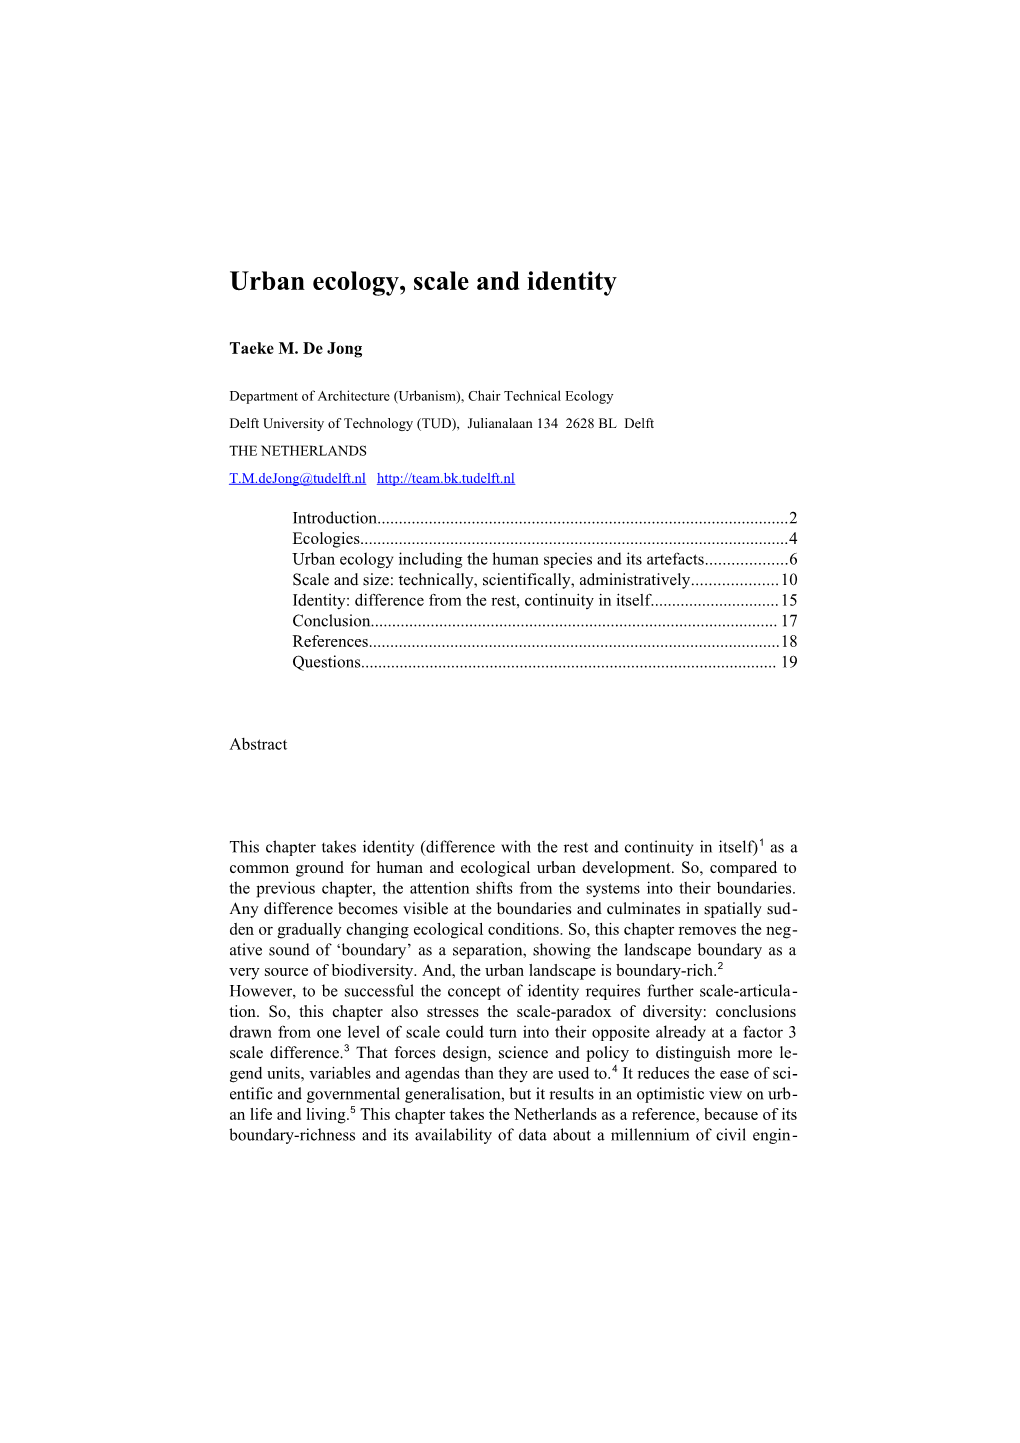 Urban Ecology, Scale and Identity